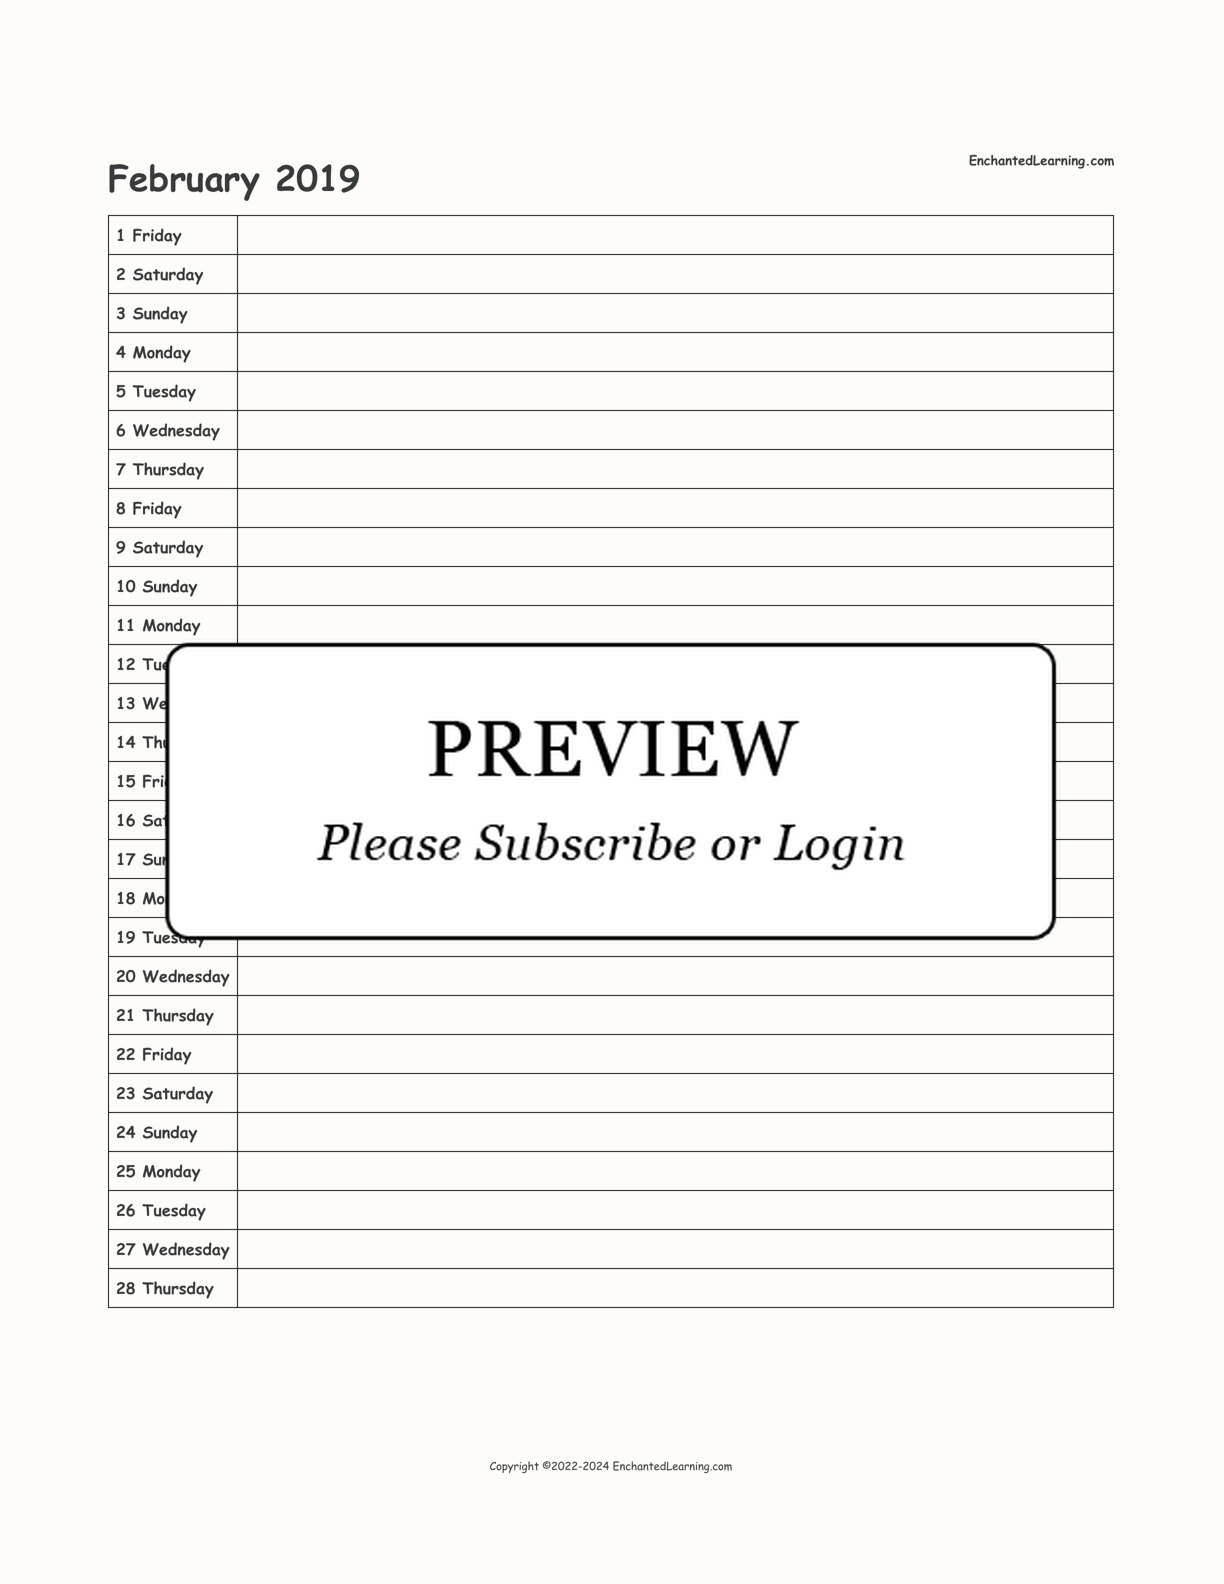 2019 Scheduling Calendar interactive printout page 2